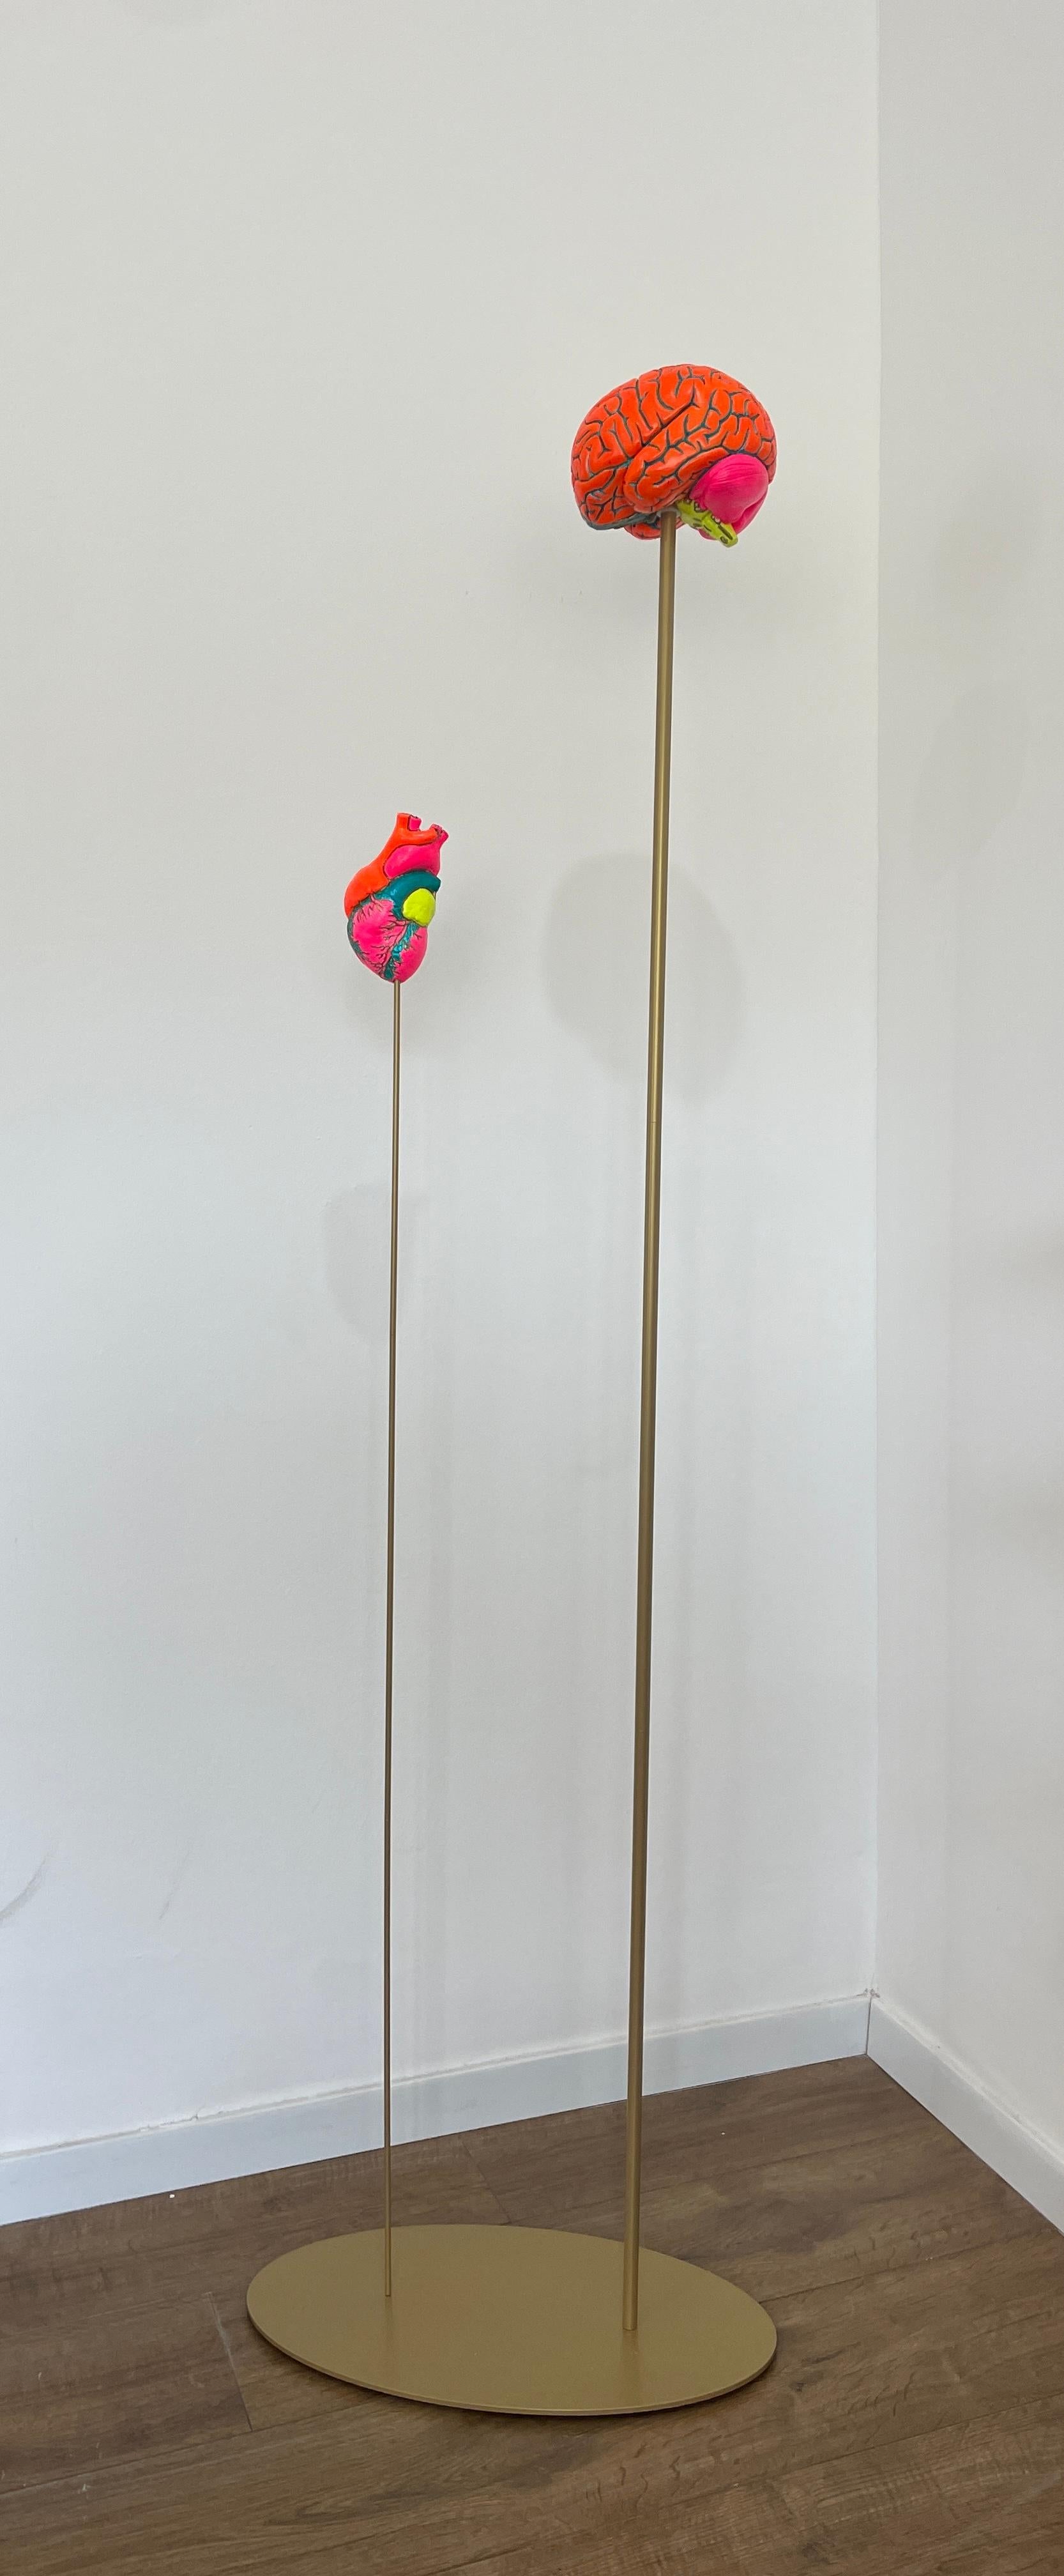 This standing kinetic sculpture by Tal Nehoray is from her latest body of works and is made of 2 hand made sculptures: a heart and a brain that are mounted on metal base.
Both sculptures are made of ceramic and plaster and are hand painted with